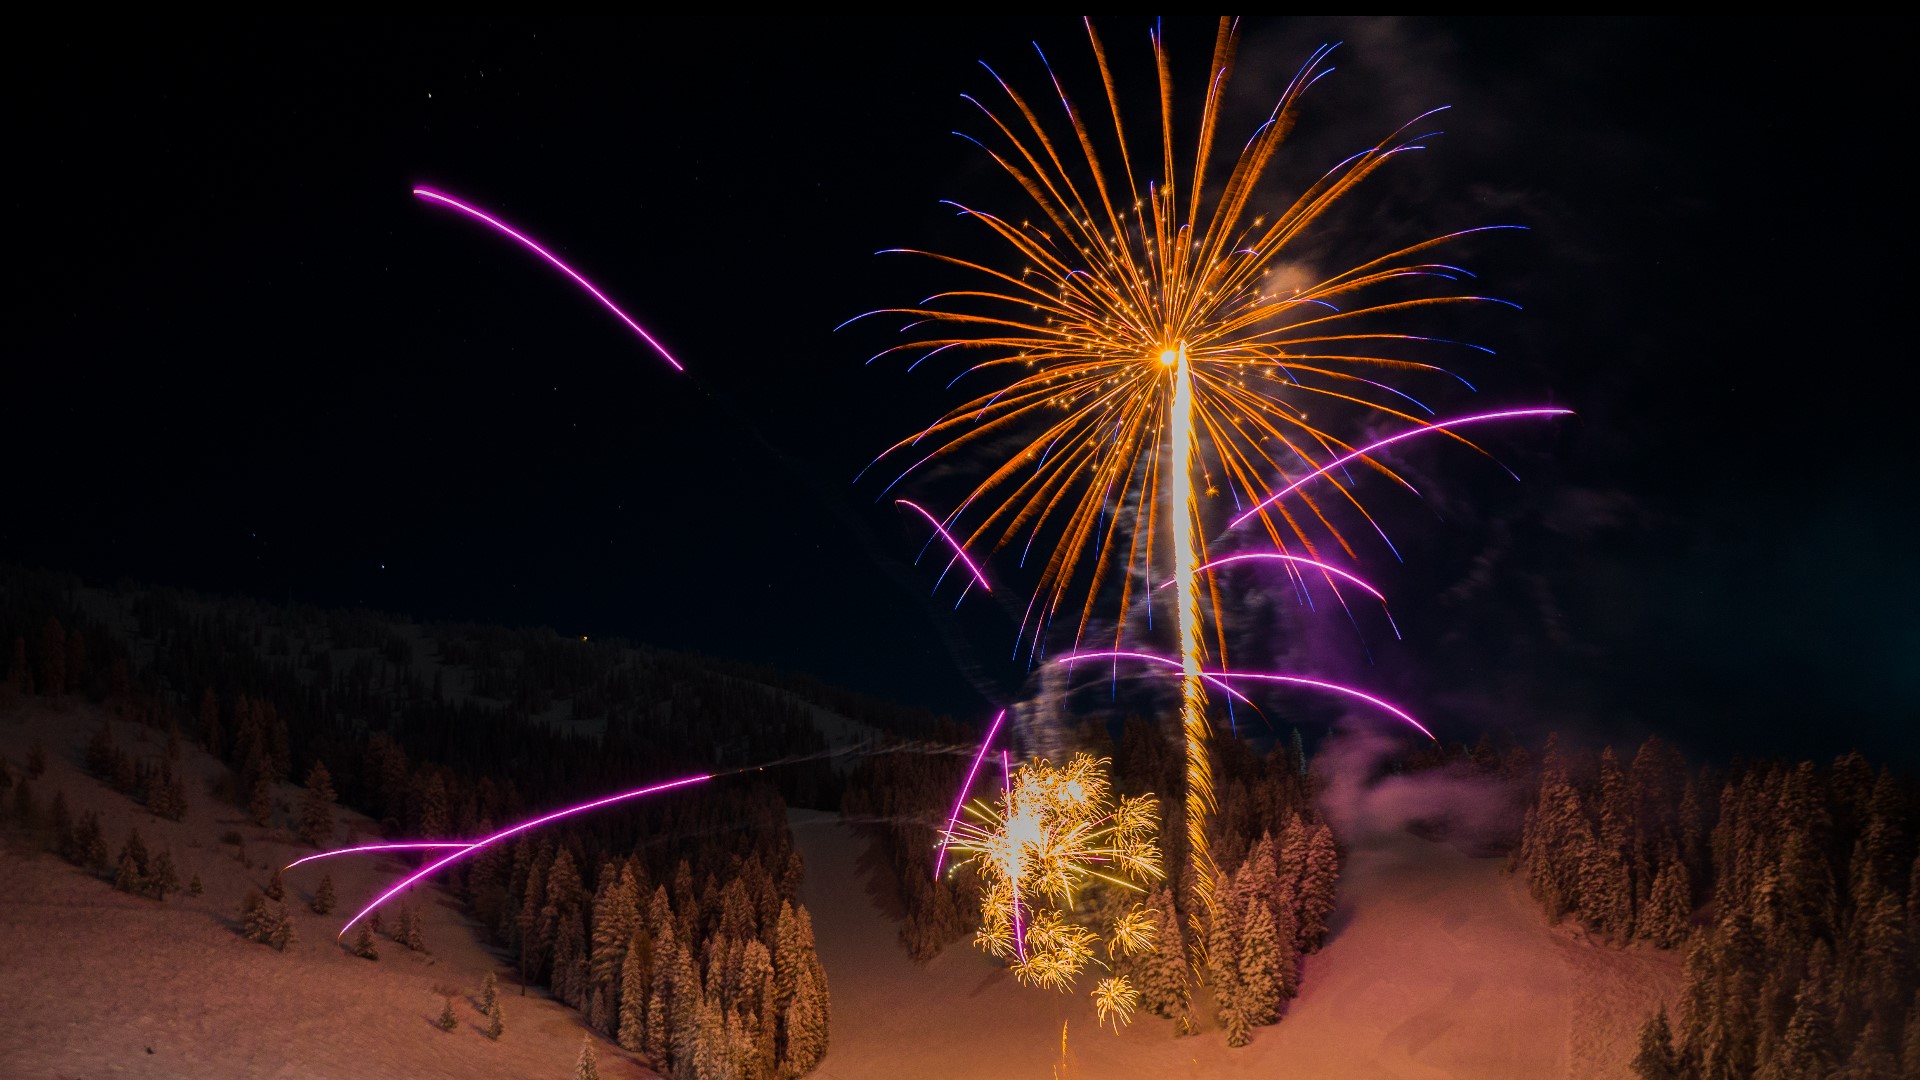 Bogus Basin, Brundage, Soldier Mountain, Sun Valley, Tamarack and other ski resorts around the Gem State are set to ring in the new year in style on the slopes.